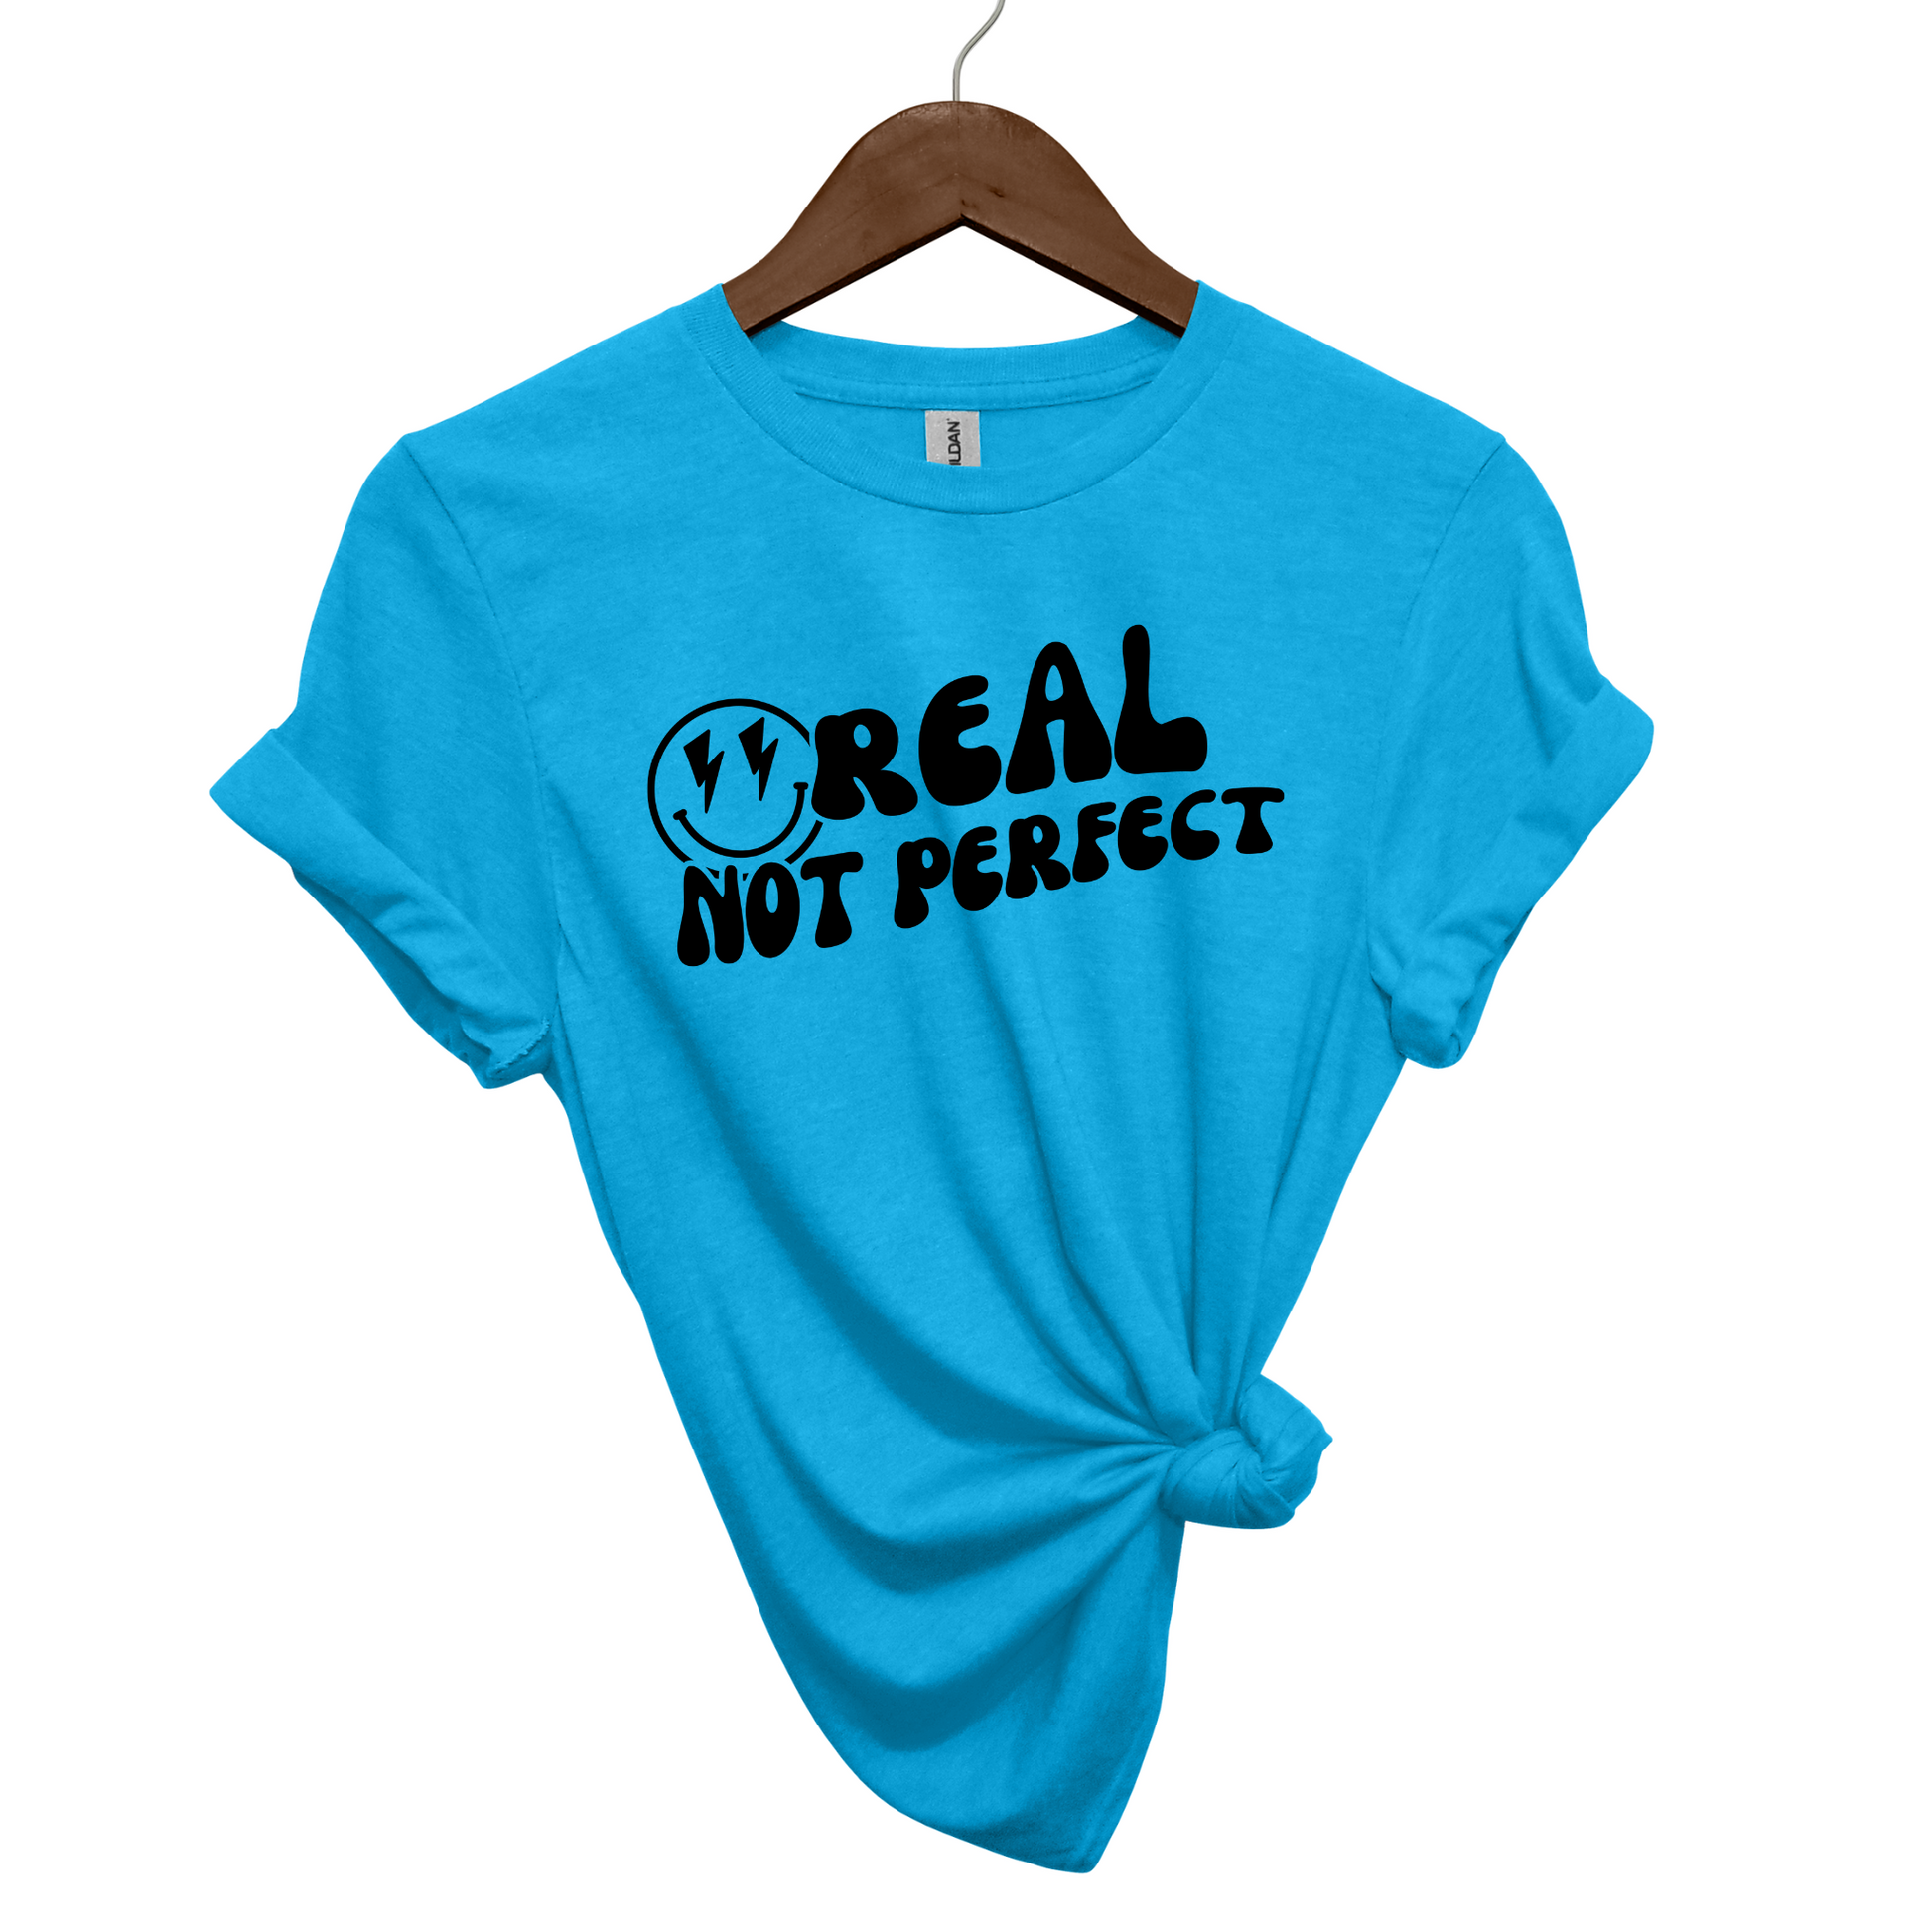 Real, Not Perfect Crewneck T Shirt heather sapphire